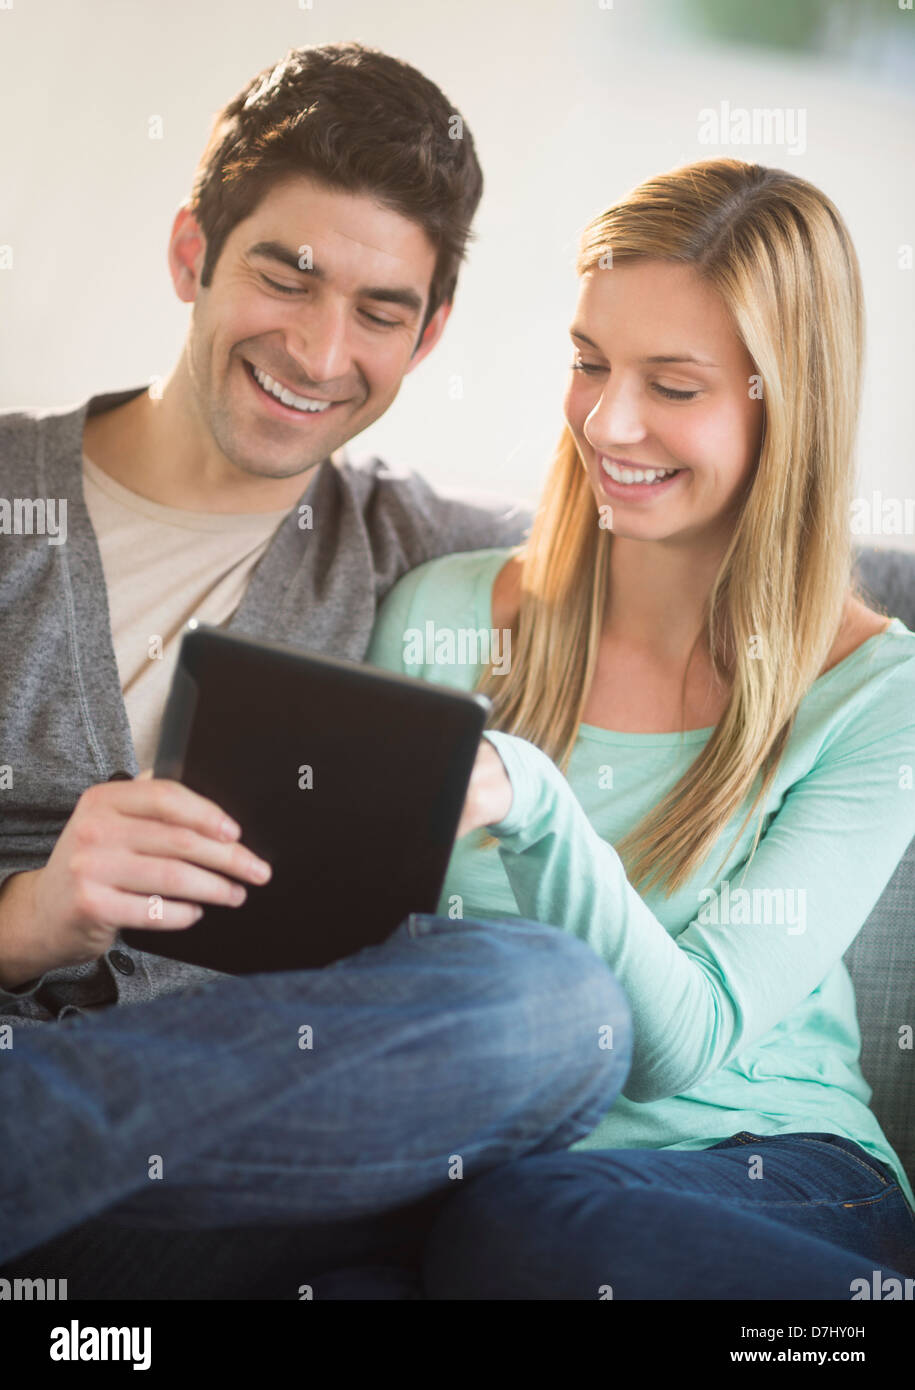 Couple using tablet pc Stock Photo